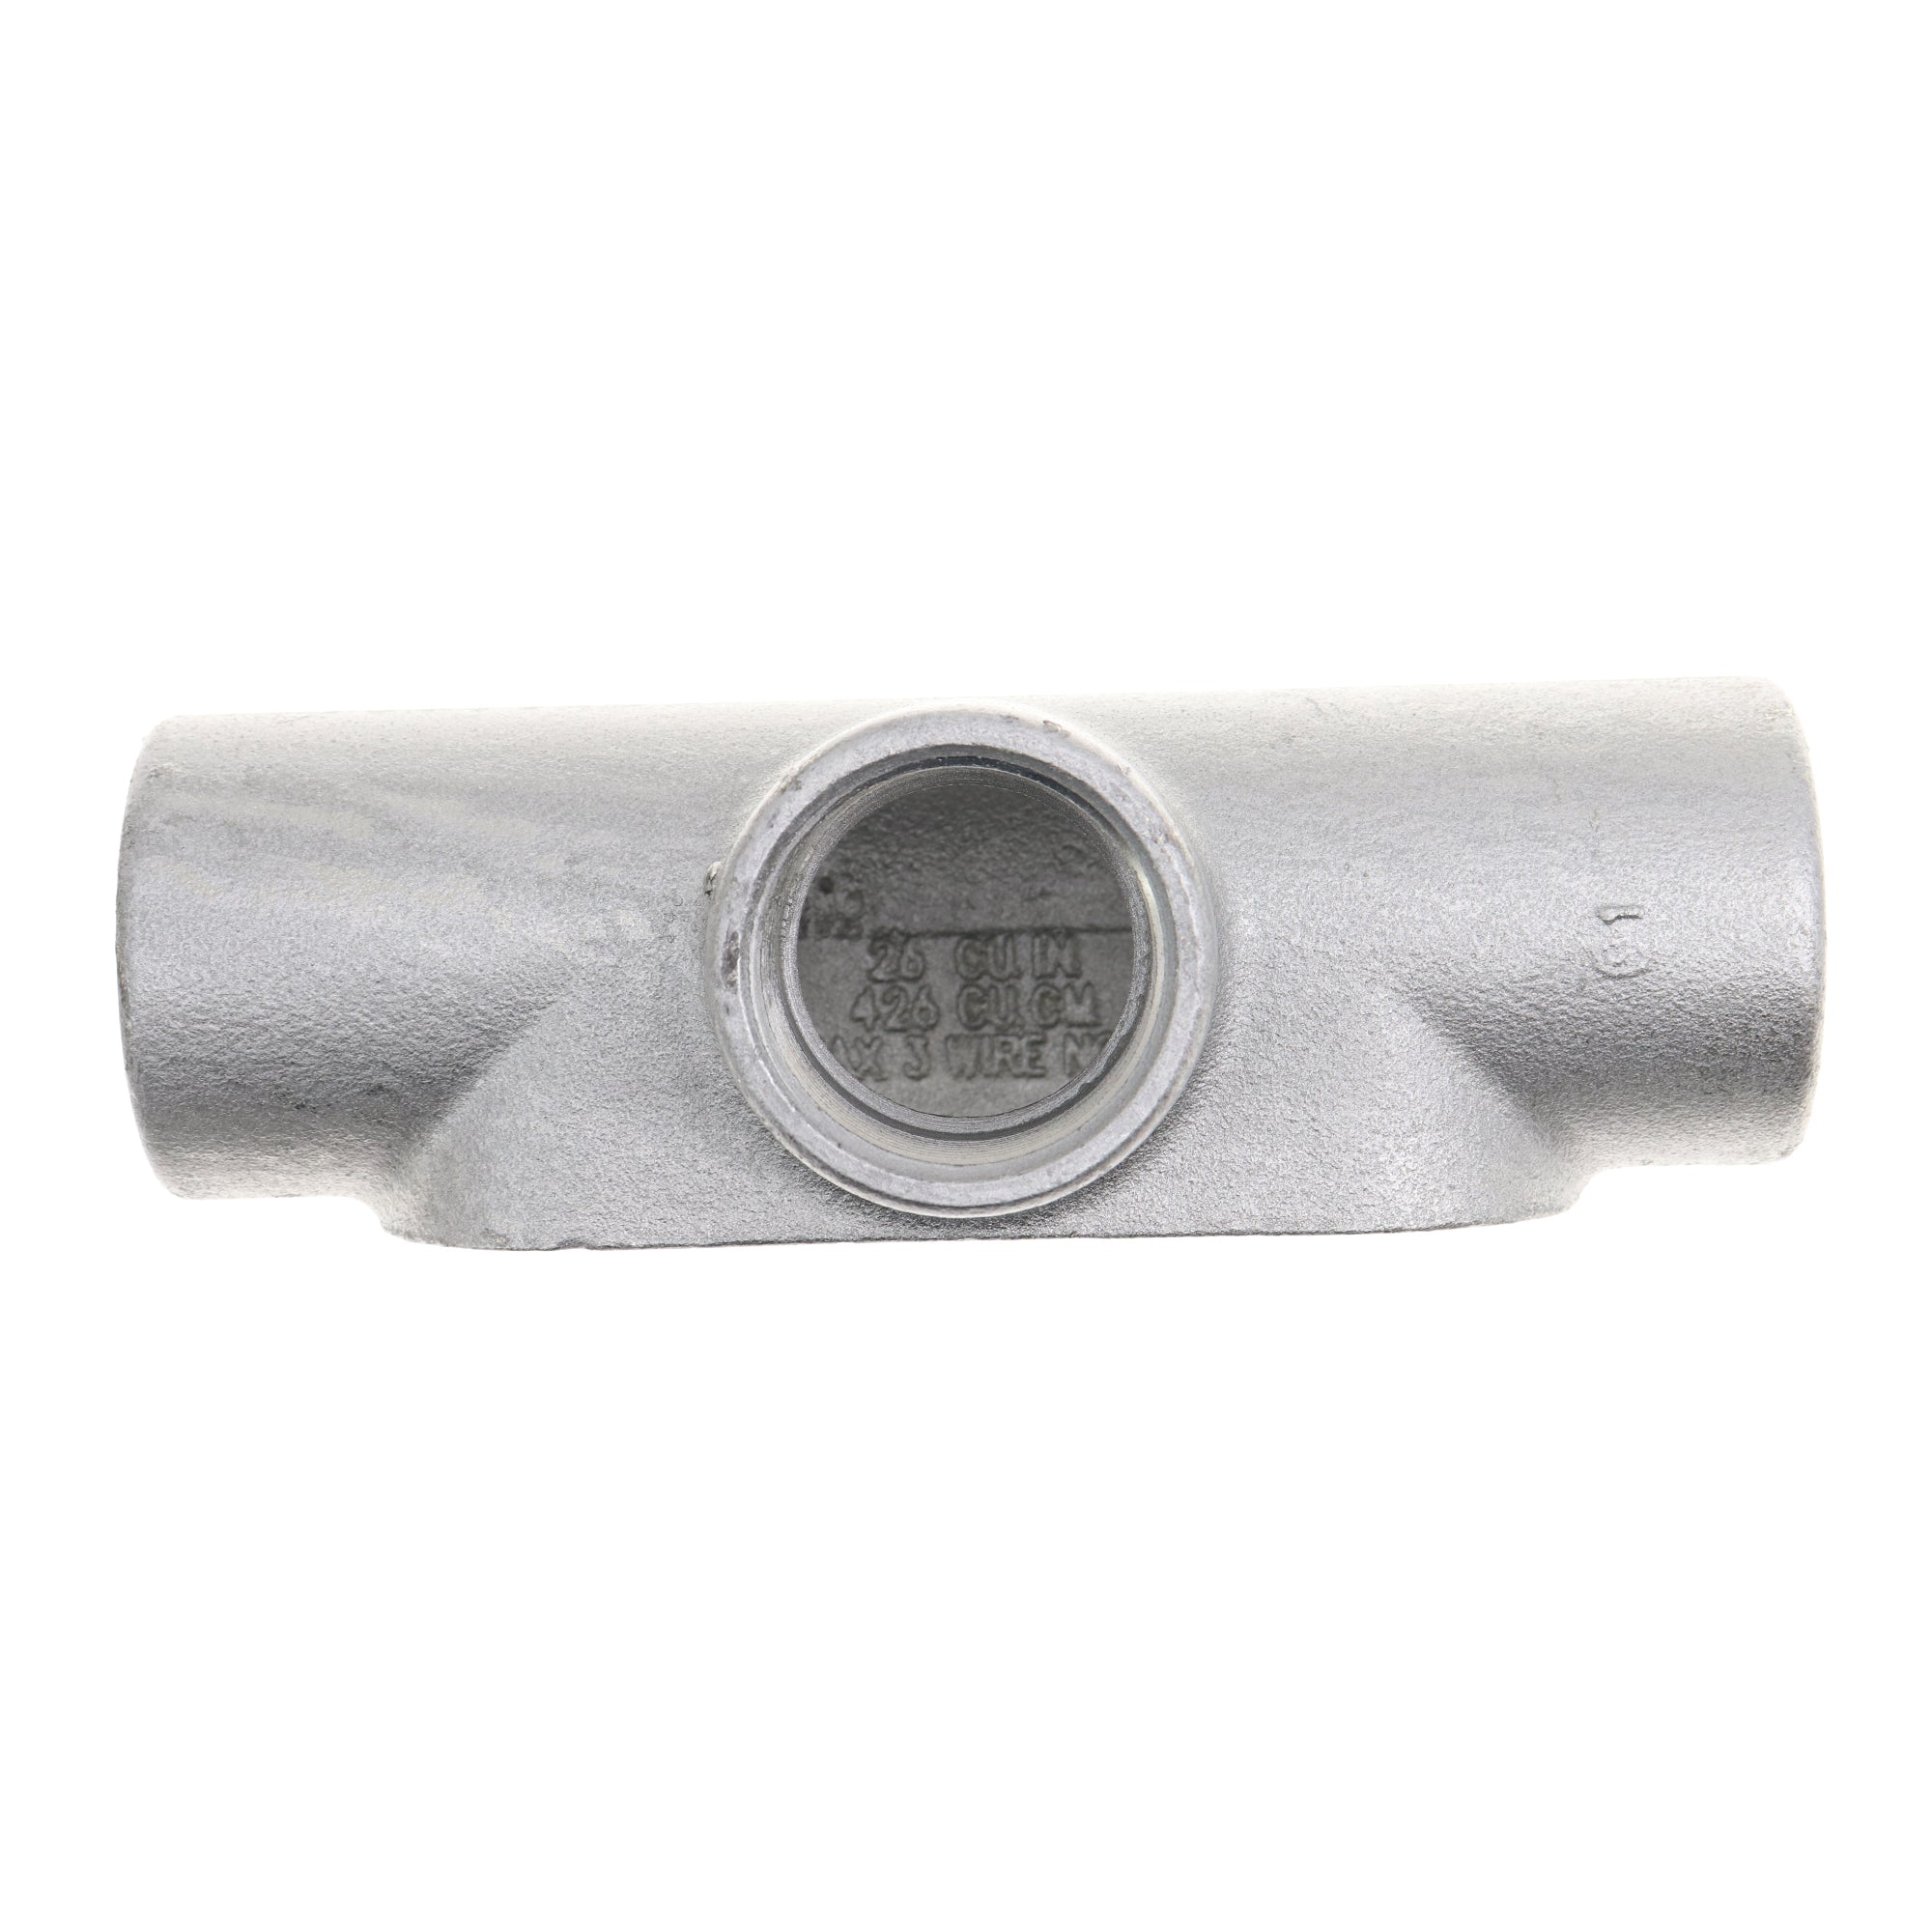 Crouse Hinds, CROUSE-HINDS T57 CONDULET FORM-7 CONDUIT OUTLET BODY, T-SHAPE, 1-1/2-INCH